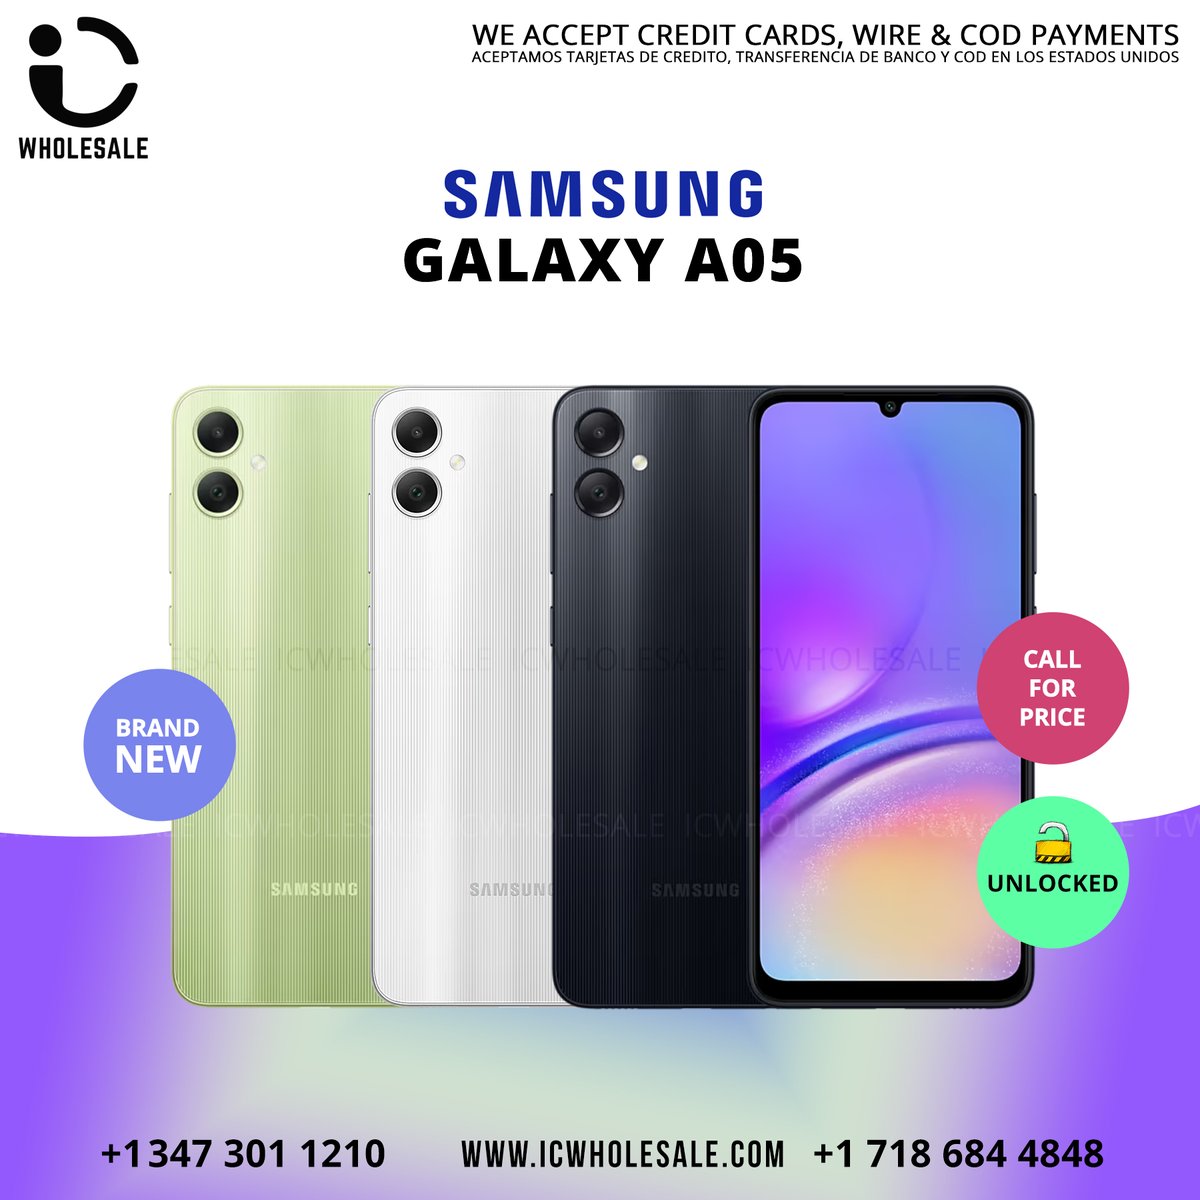 Selling Samsung Galaxy A05 (New) Unlocked phones from #Bronx. Buy Now by just clicking the link: icwholesale.com/samsung-galaxy…
Call Us: +1-718-684-4848 for same day delivery.
#samsunggalaxya05 #samsunga05 #a05 #samsunggalaxy #galaxya05 #Newyork #NYC #NY #Bronxny #android #smartphones